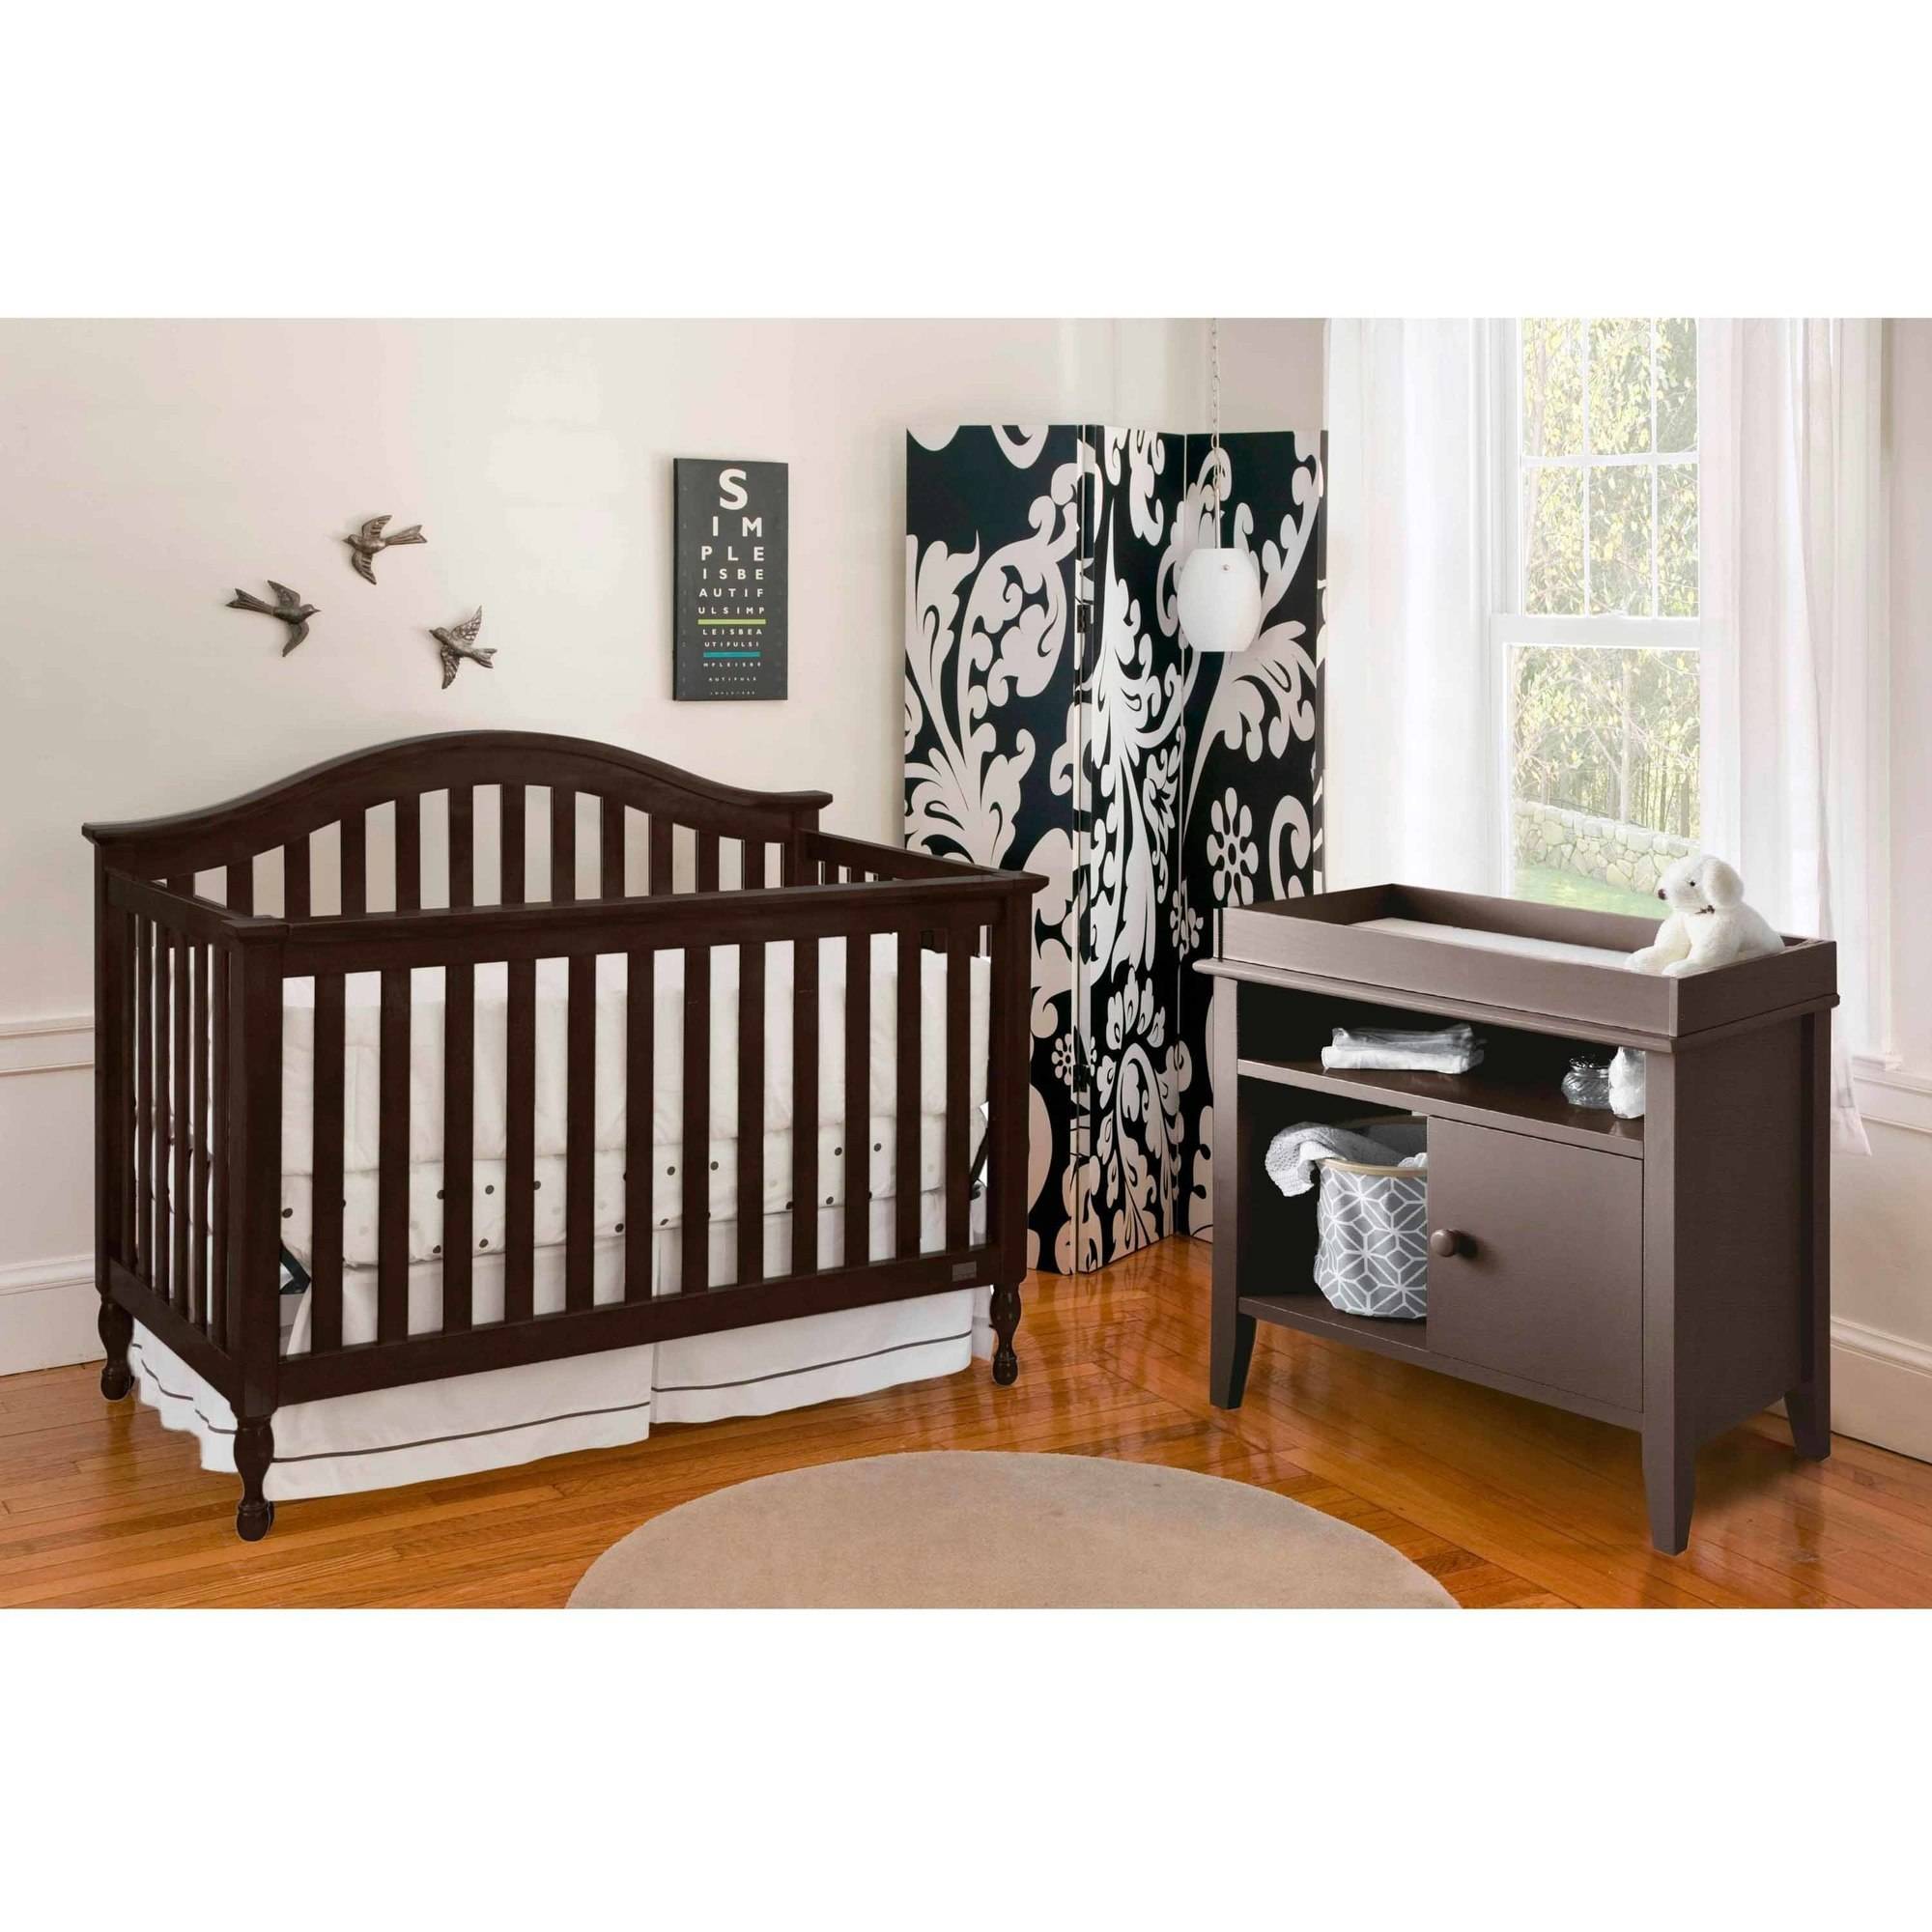 Lolly & Me Bailey 4-in-1 Convertible Crib Acorn - image 1 of 2